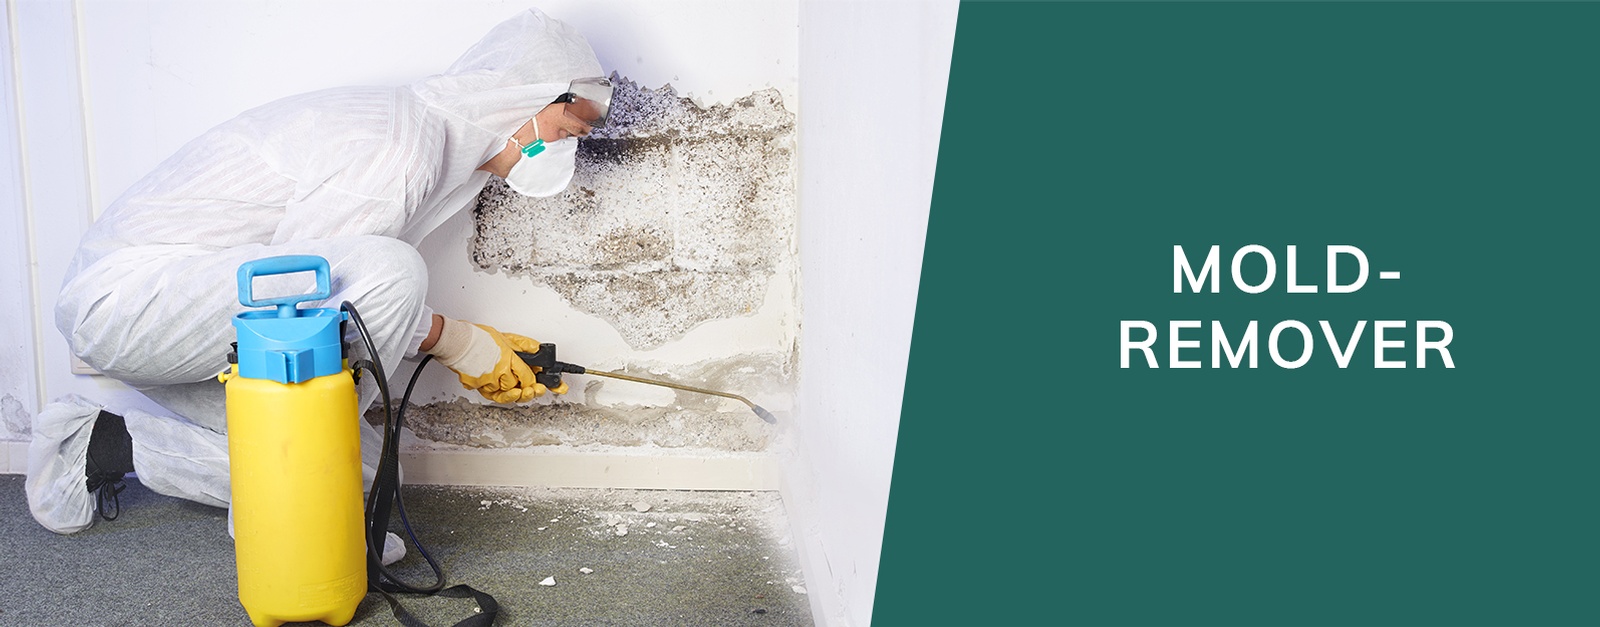 Mold Remover and Mold Remediation - Mold Removal Contractor Manhattan at EC Abatement Inc